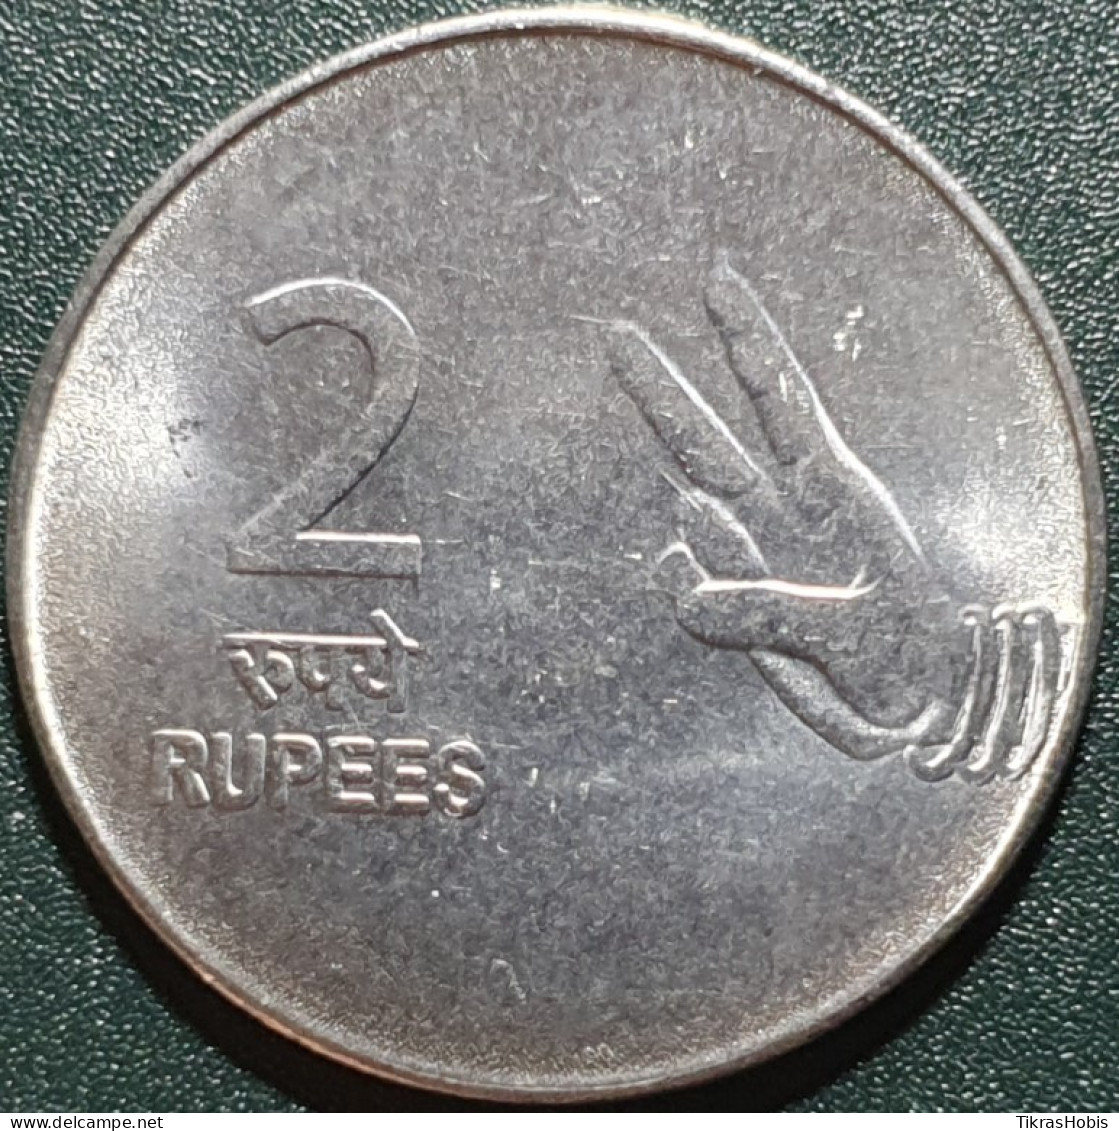 India 2 Rupees, 2009 Km327 - Indien